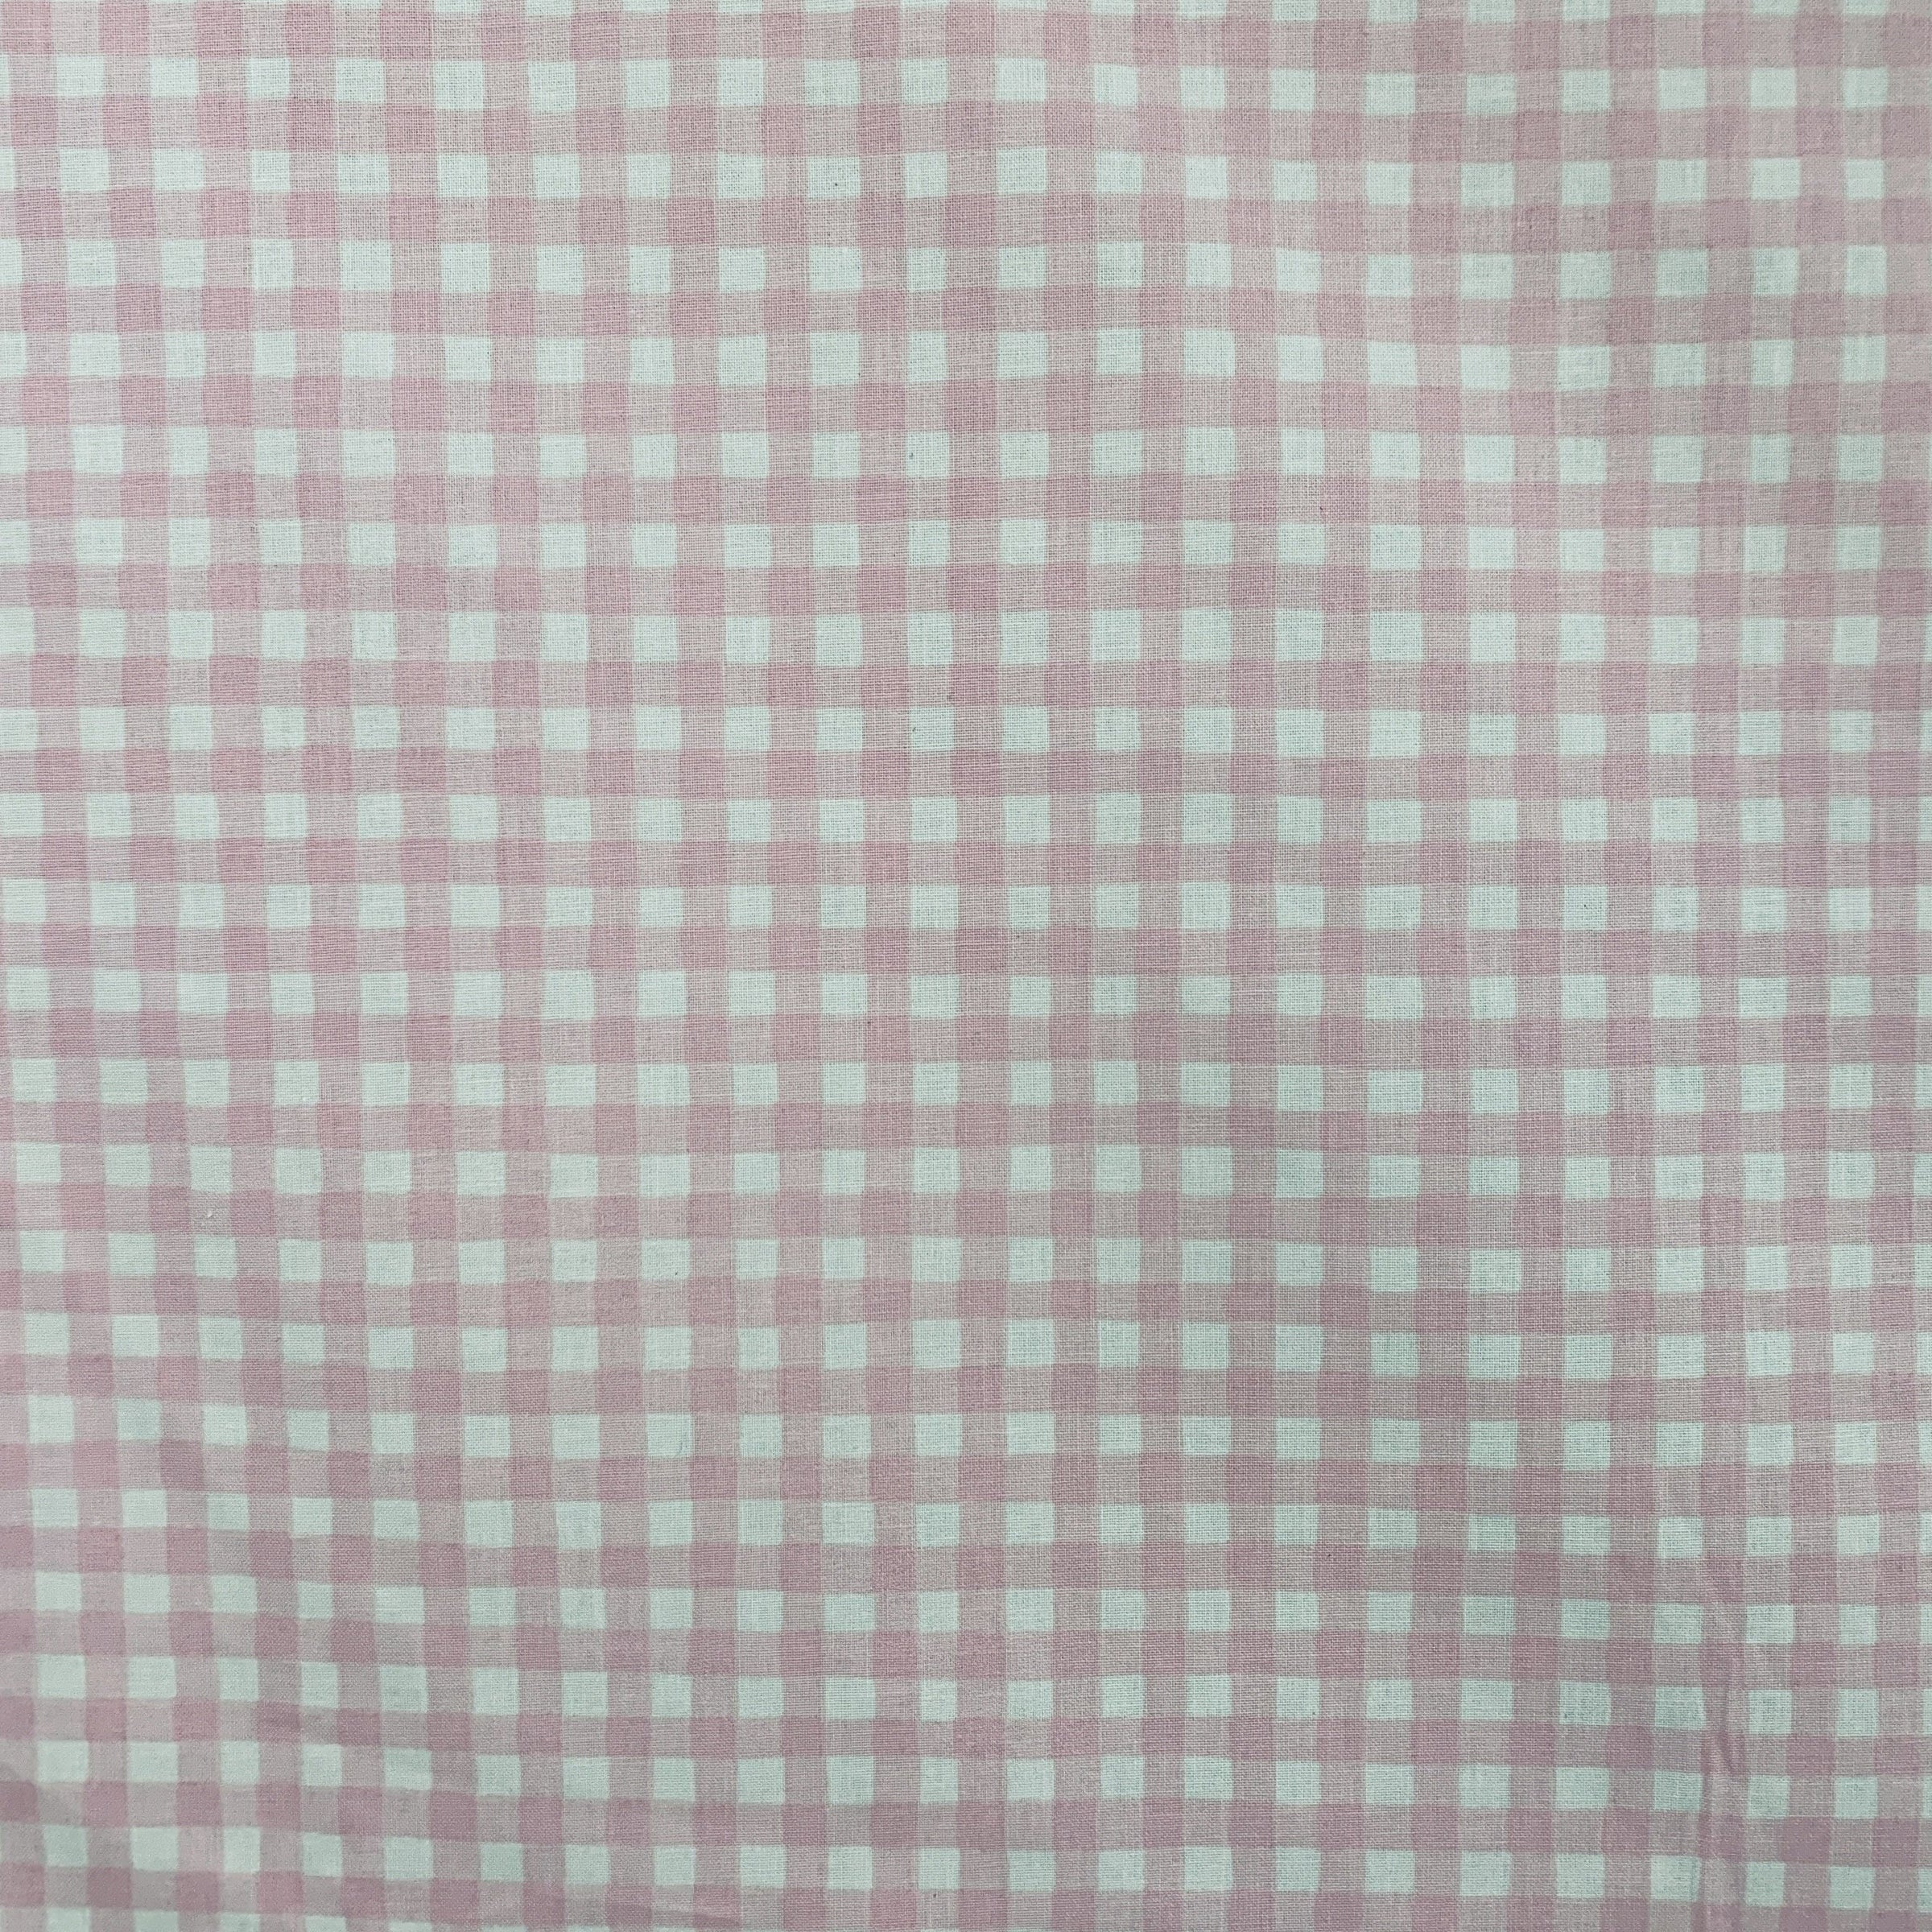 Pink and White Gingham Fabric